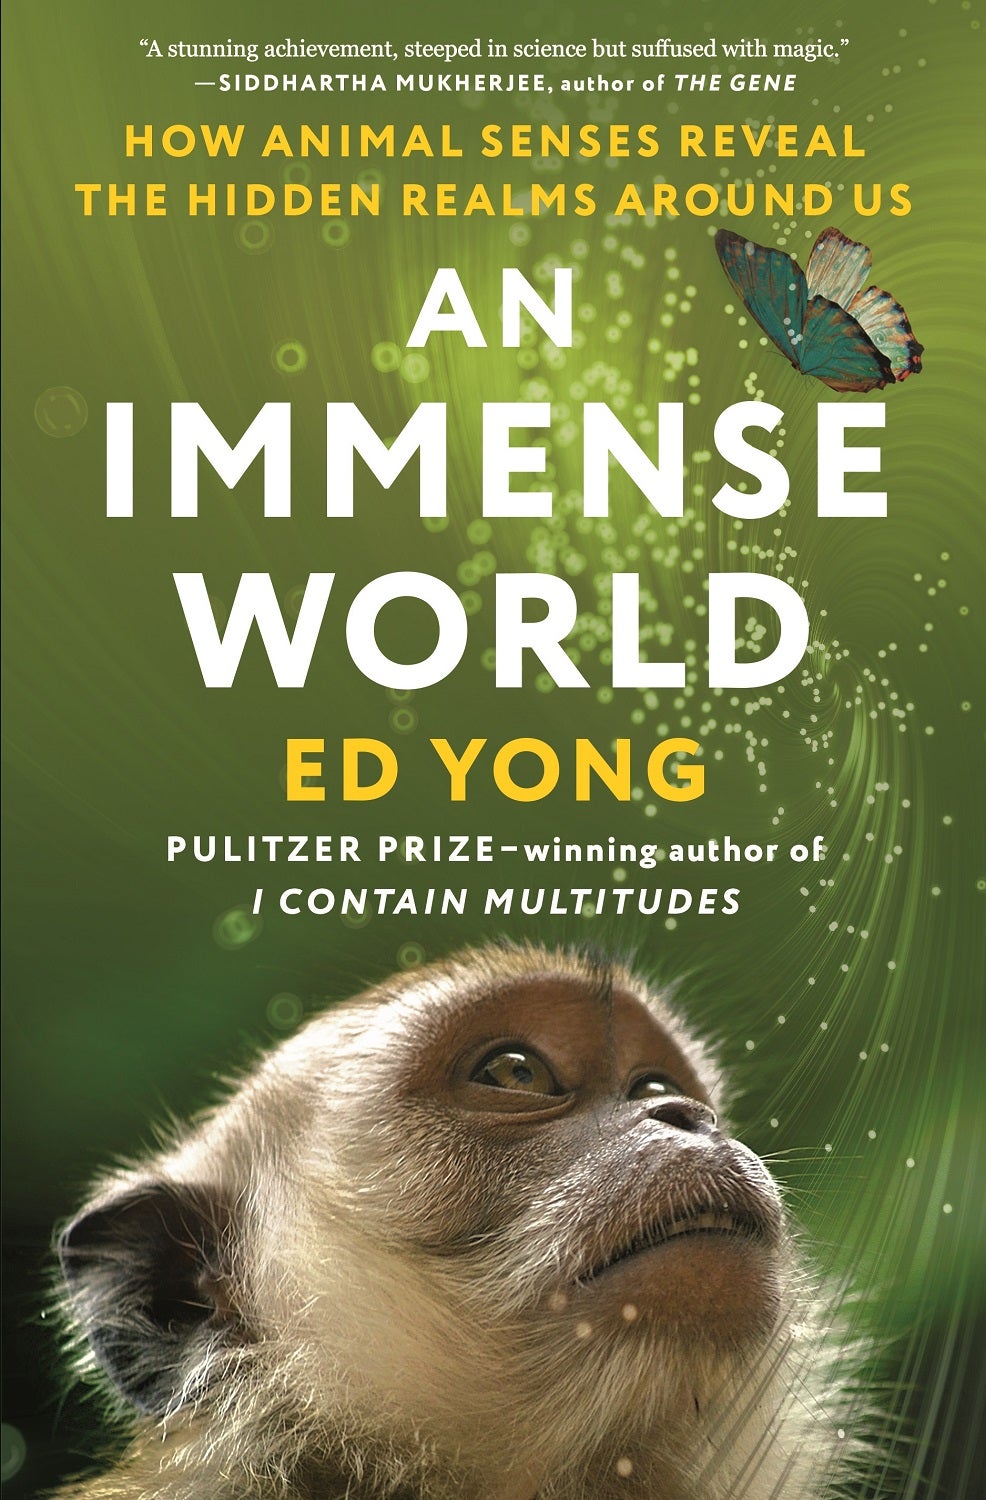 An Immense World by Ed Yong book cover with a white monkey looking up at a blue butterfly on a green background with white and gold all-caps text